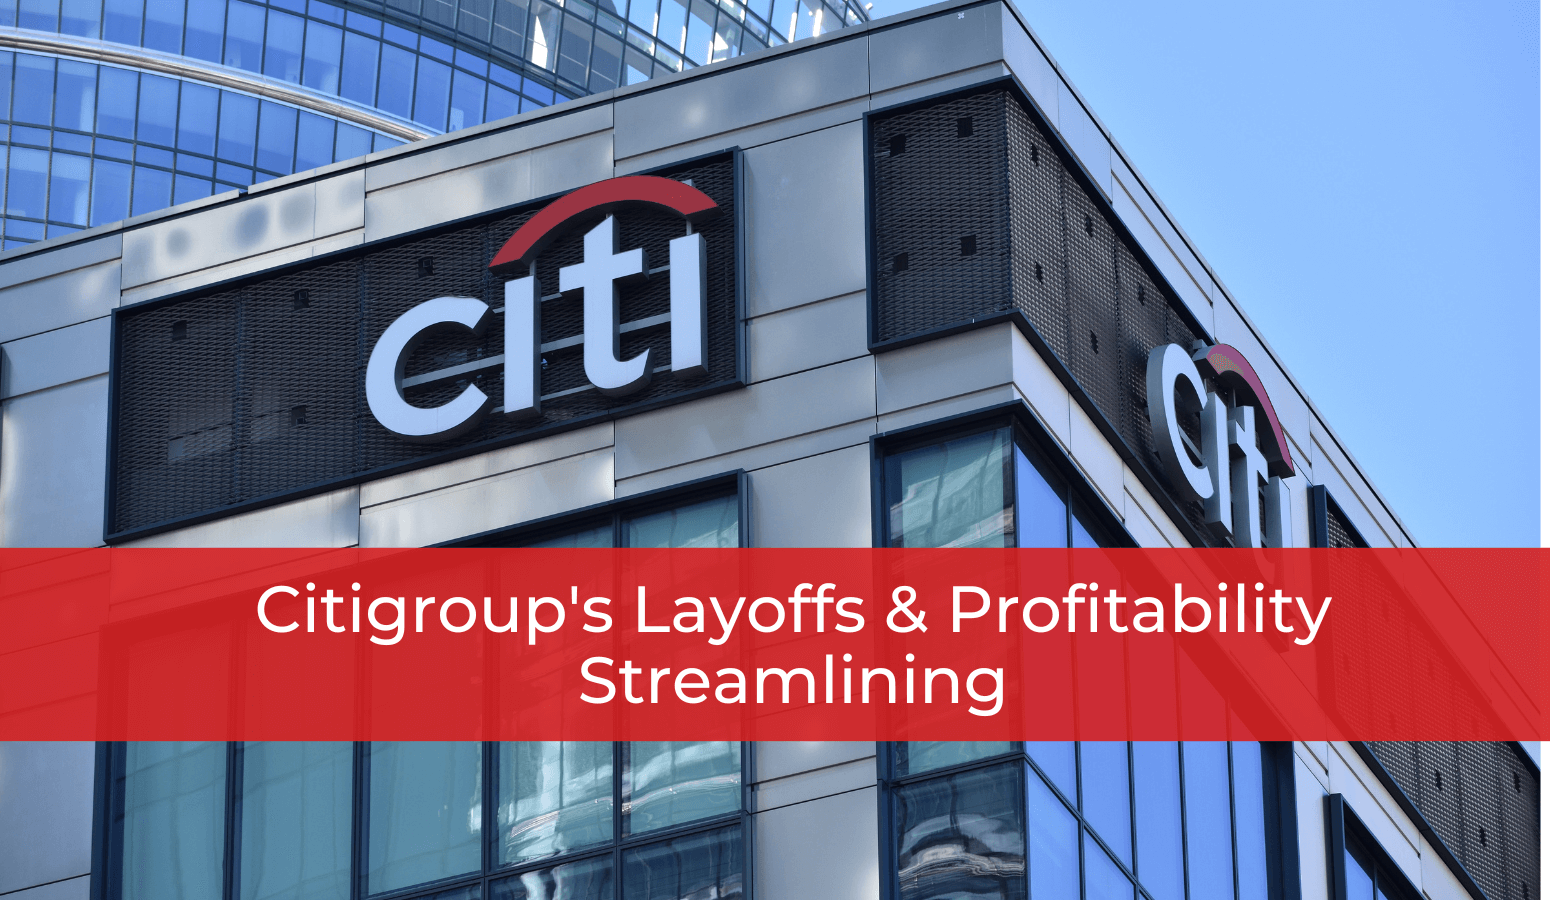 Featured image for “Citigroup’s Layoffs & Profitability Streamlining”